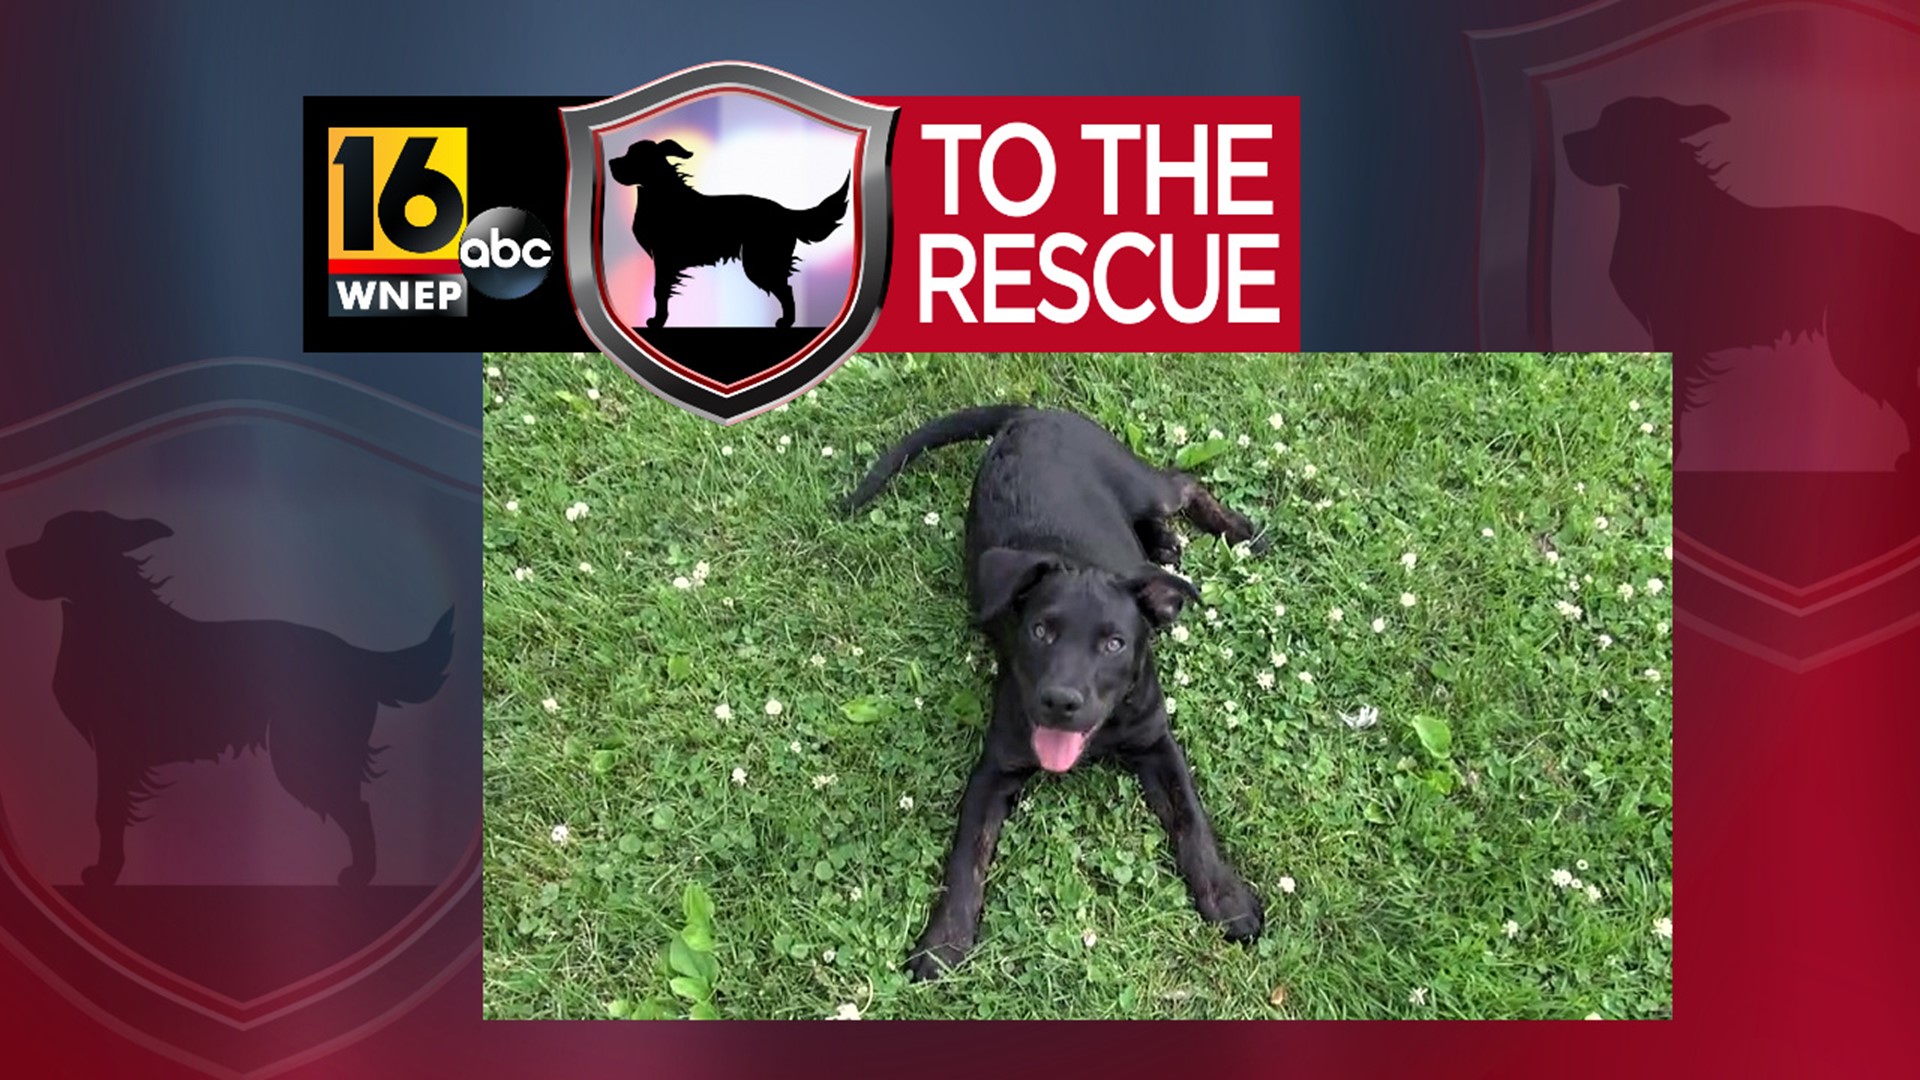 In this week's 16 To The Rescue, we meet 5 puppies: Turbo, Elvira, Amber, Belinda, and Camilla.